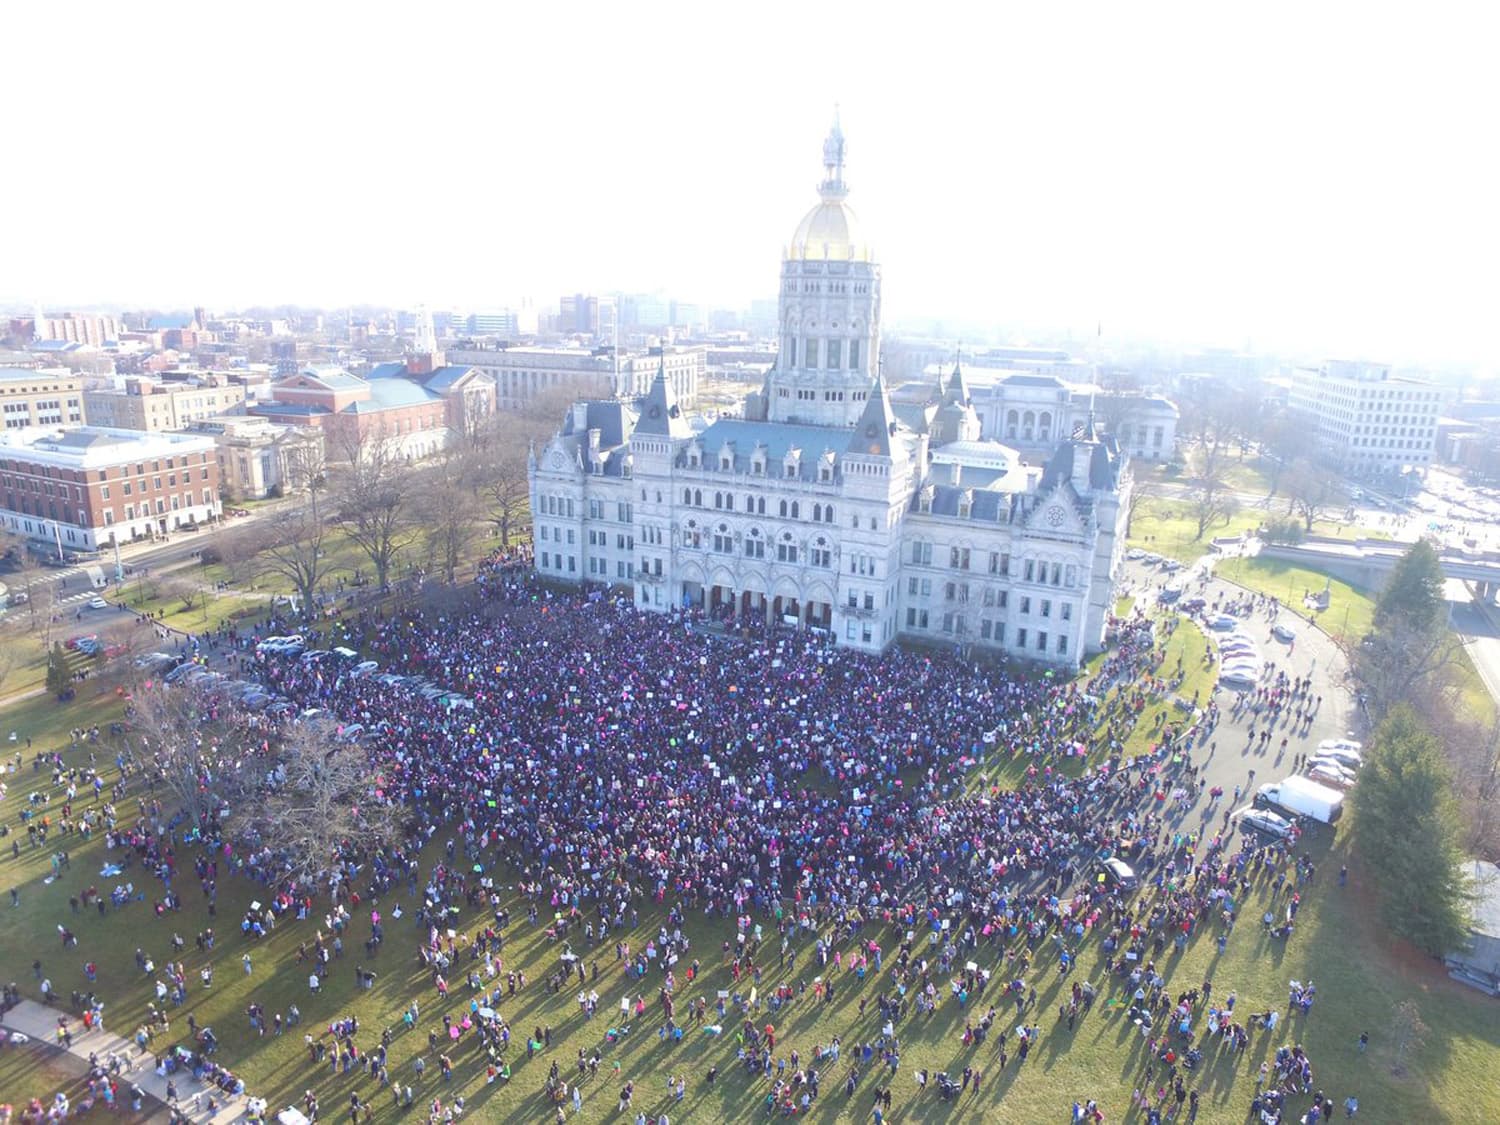 A scene at the Connecticut State Capitol in Hartford, CT during Saturday's Women's March in the Nutmeg State. (Courtesy Mary_Vrp)